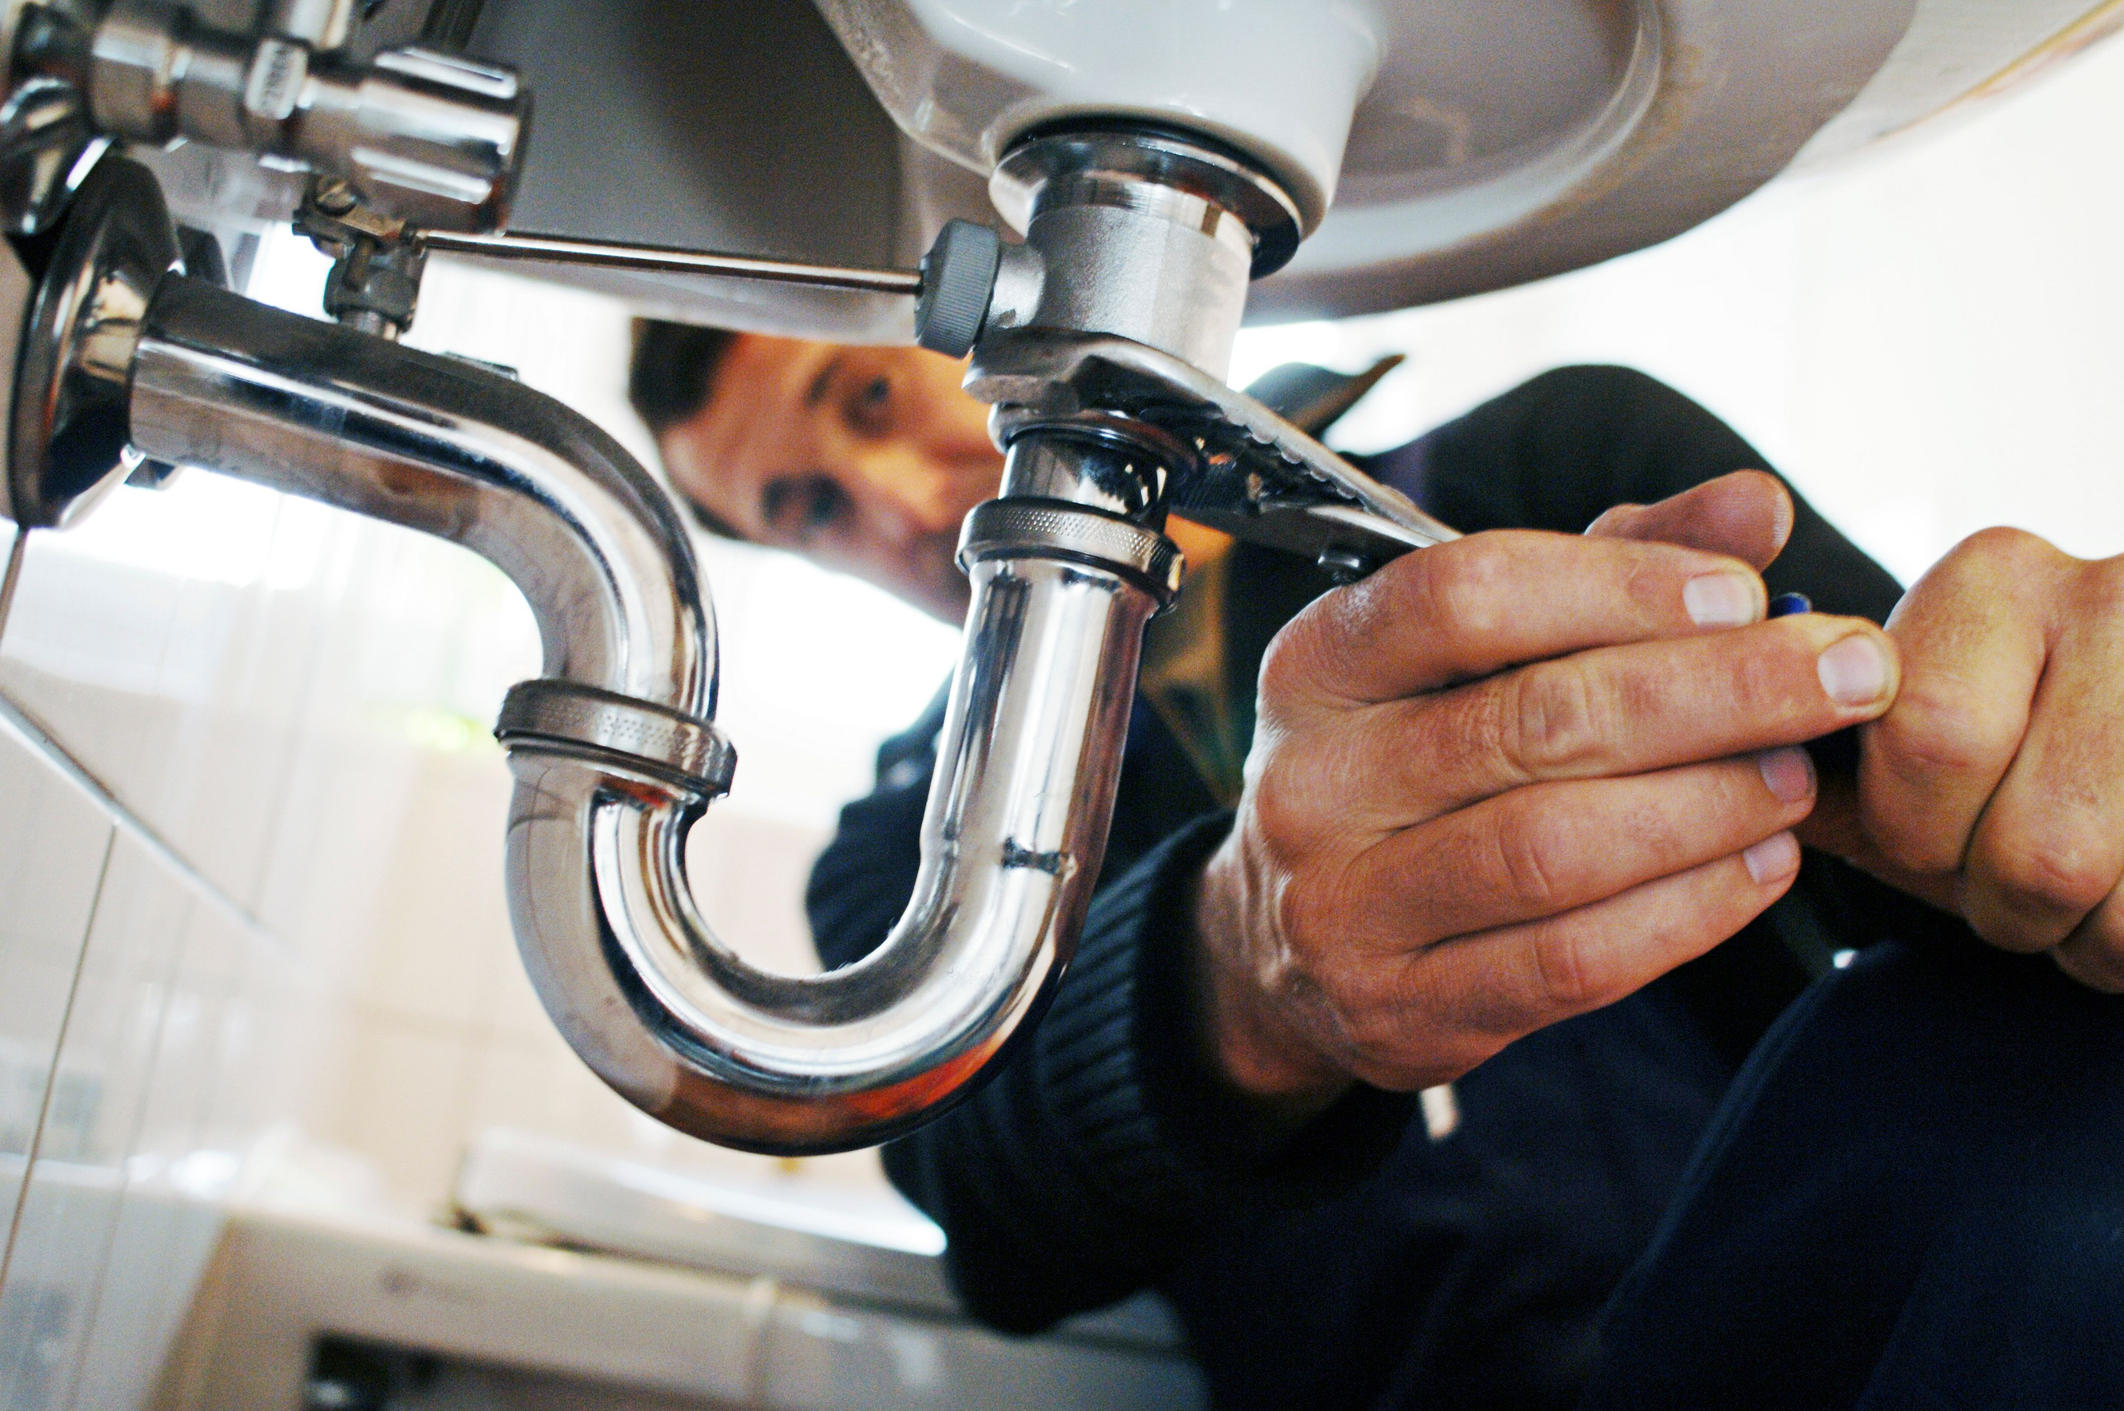 Plumbing and drain problems can happen at anytime. Usually occurring during the worst times when we are in the middle of doing important tasks around the house or business. Having downtime especially in a business setting can cause loss of revenue and productivity . Draino has been one of the most trusted plumbing and sewer companies for local residential and commercial clients